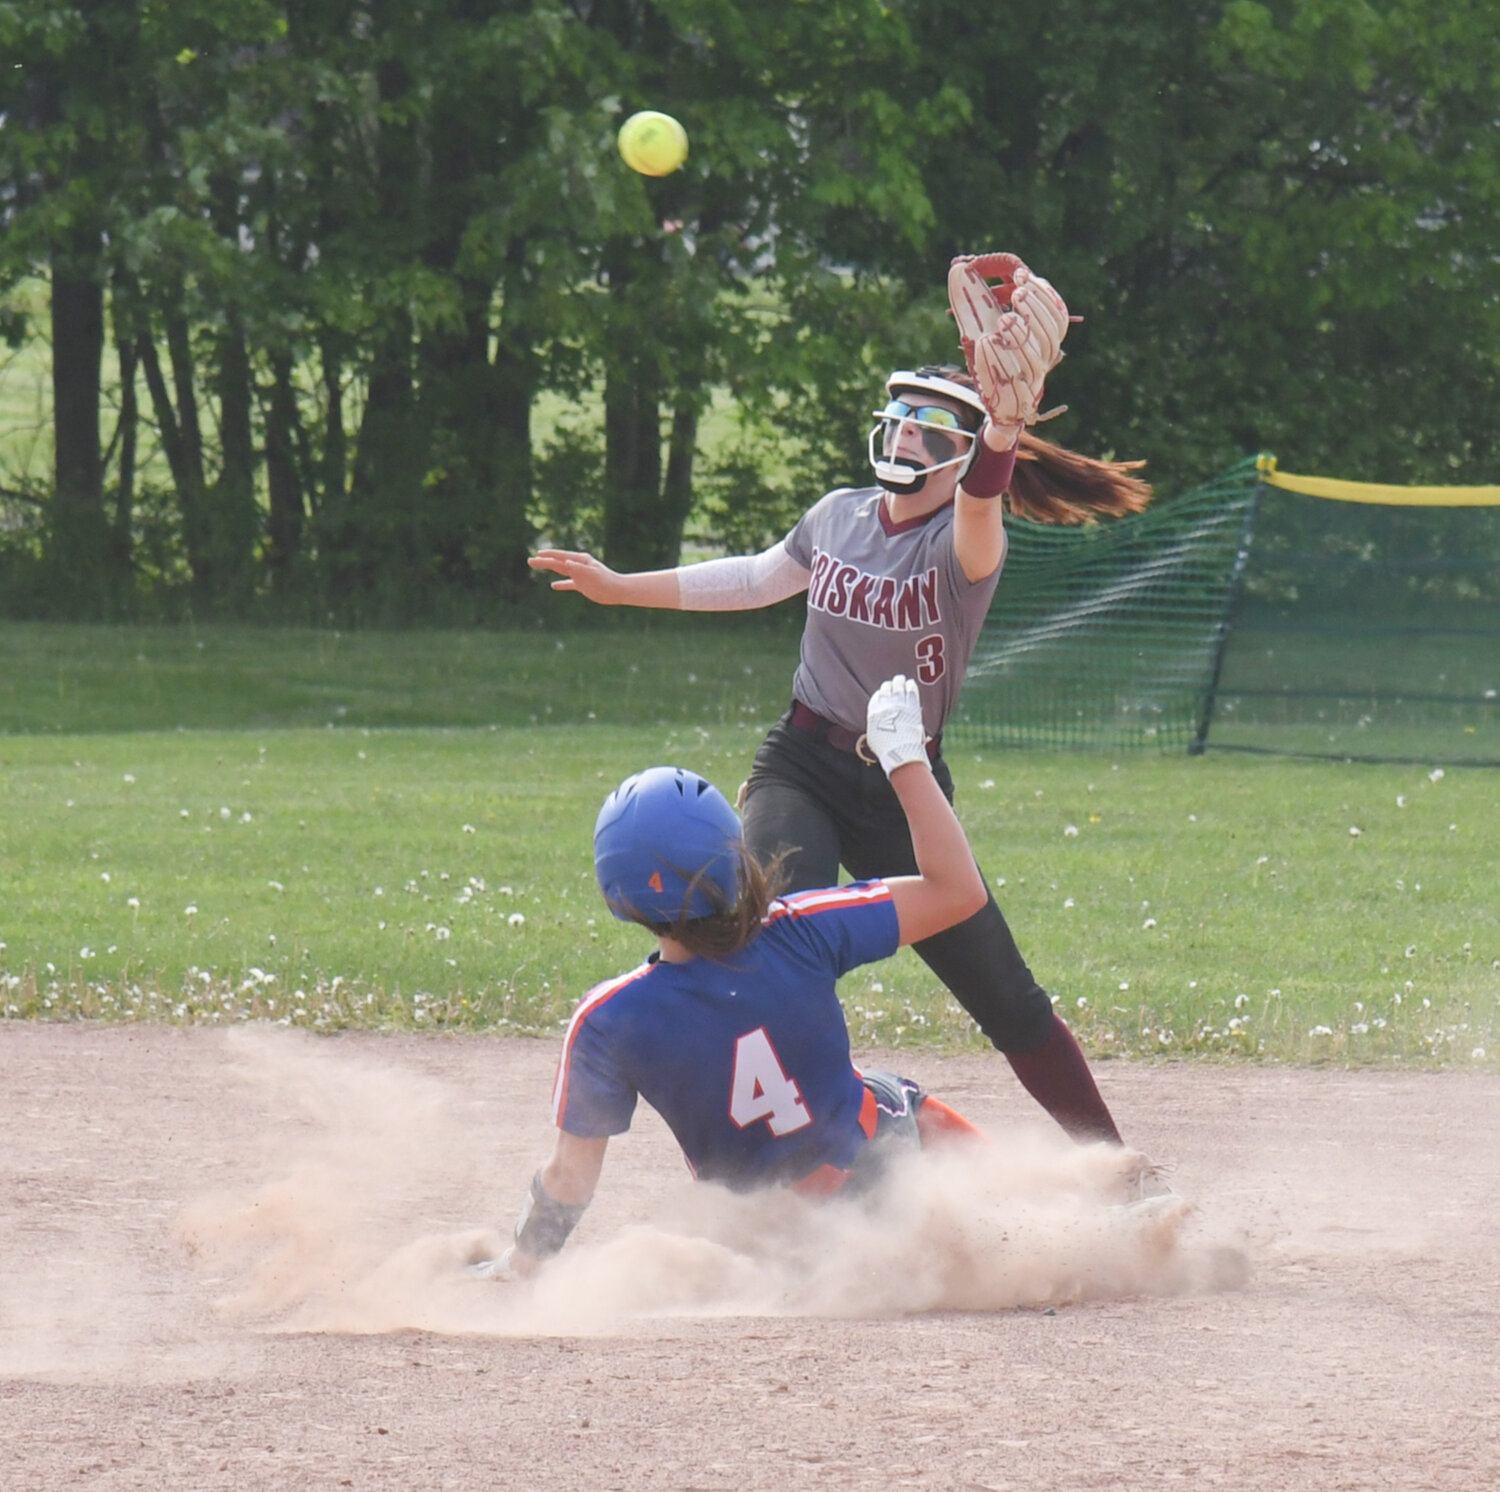 Oriskany's Brooke Matys attempts to make a catch as Poland's Maddison Haver slides into second base on Friday. Haver was safe on the play.